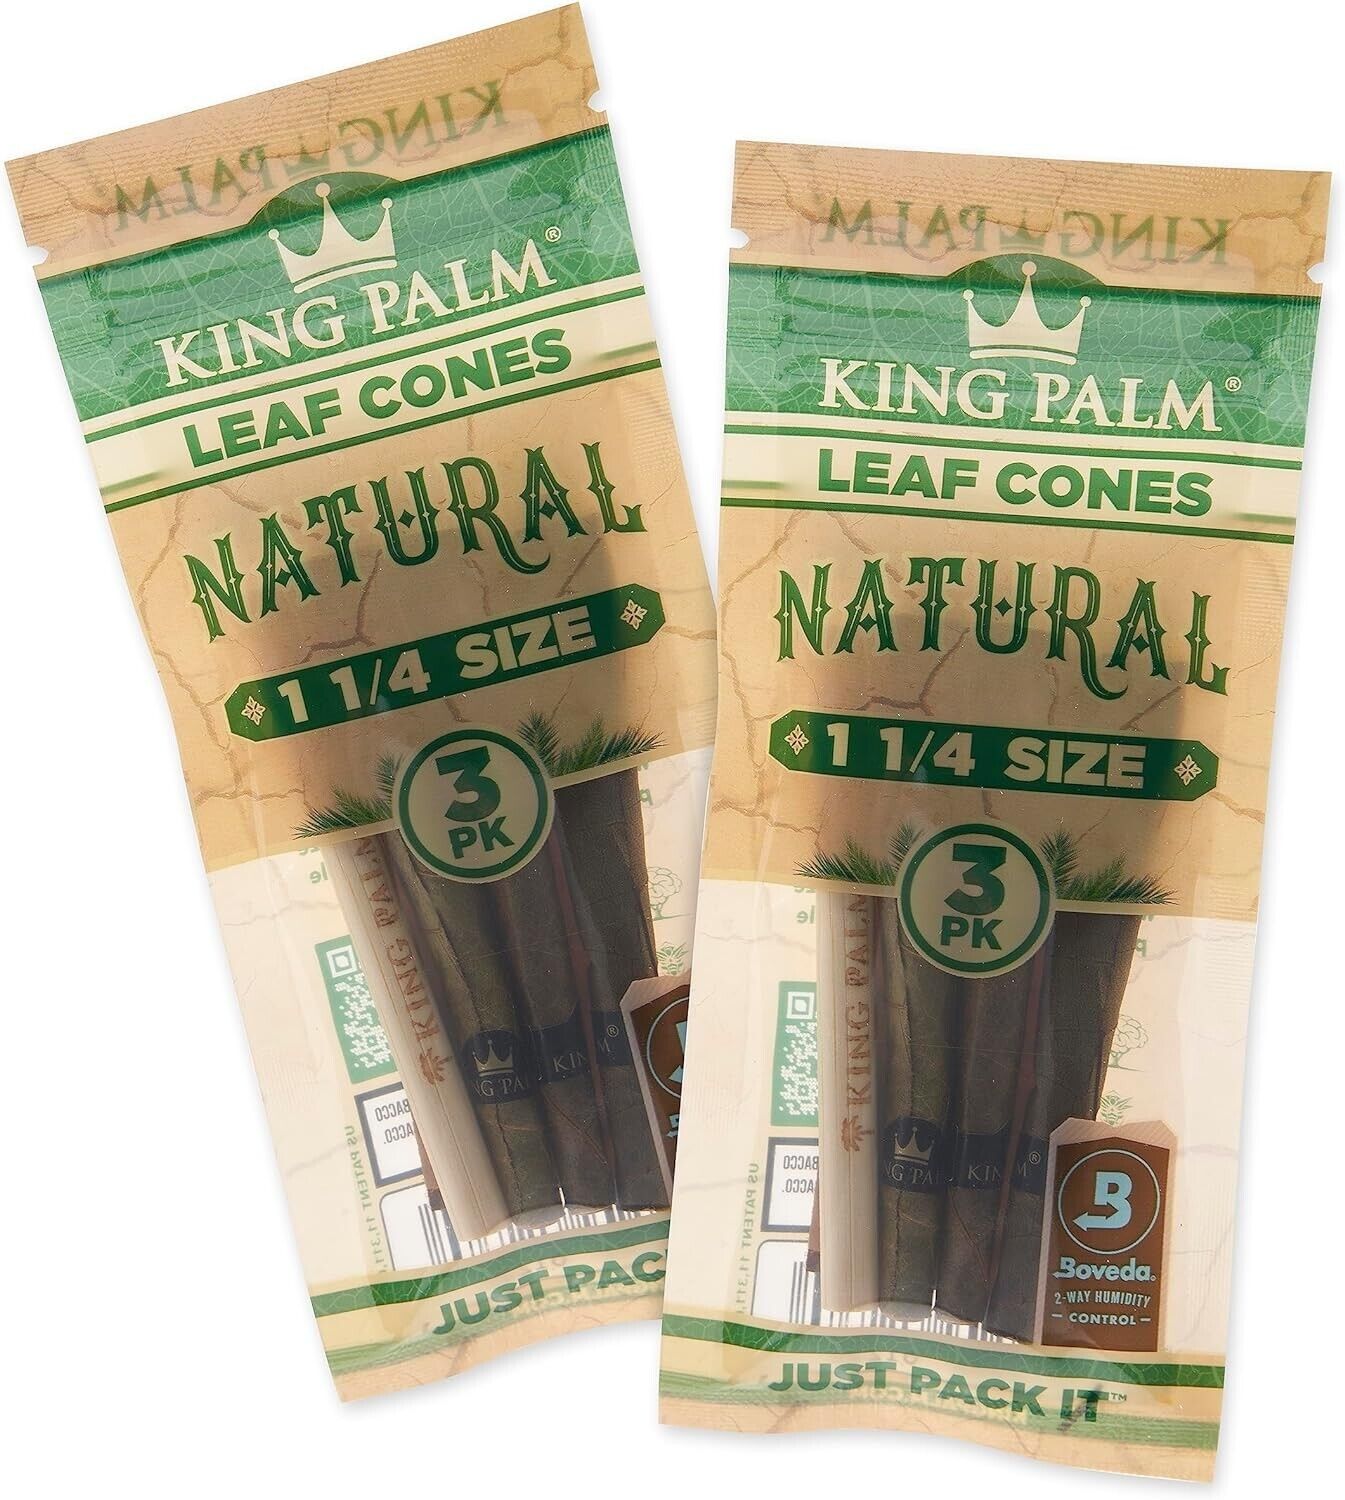 King Palm | 11/4 | Natural | Prerolled Palm Leafs | 2 Packs of 3 Each = 6 Rolls